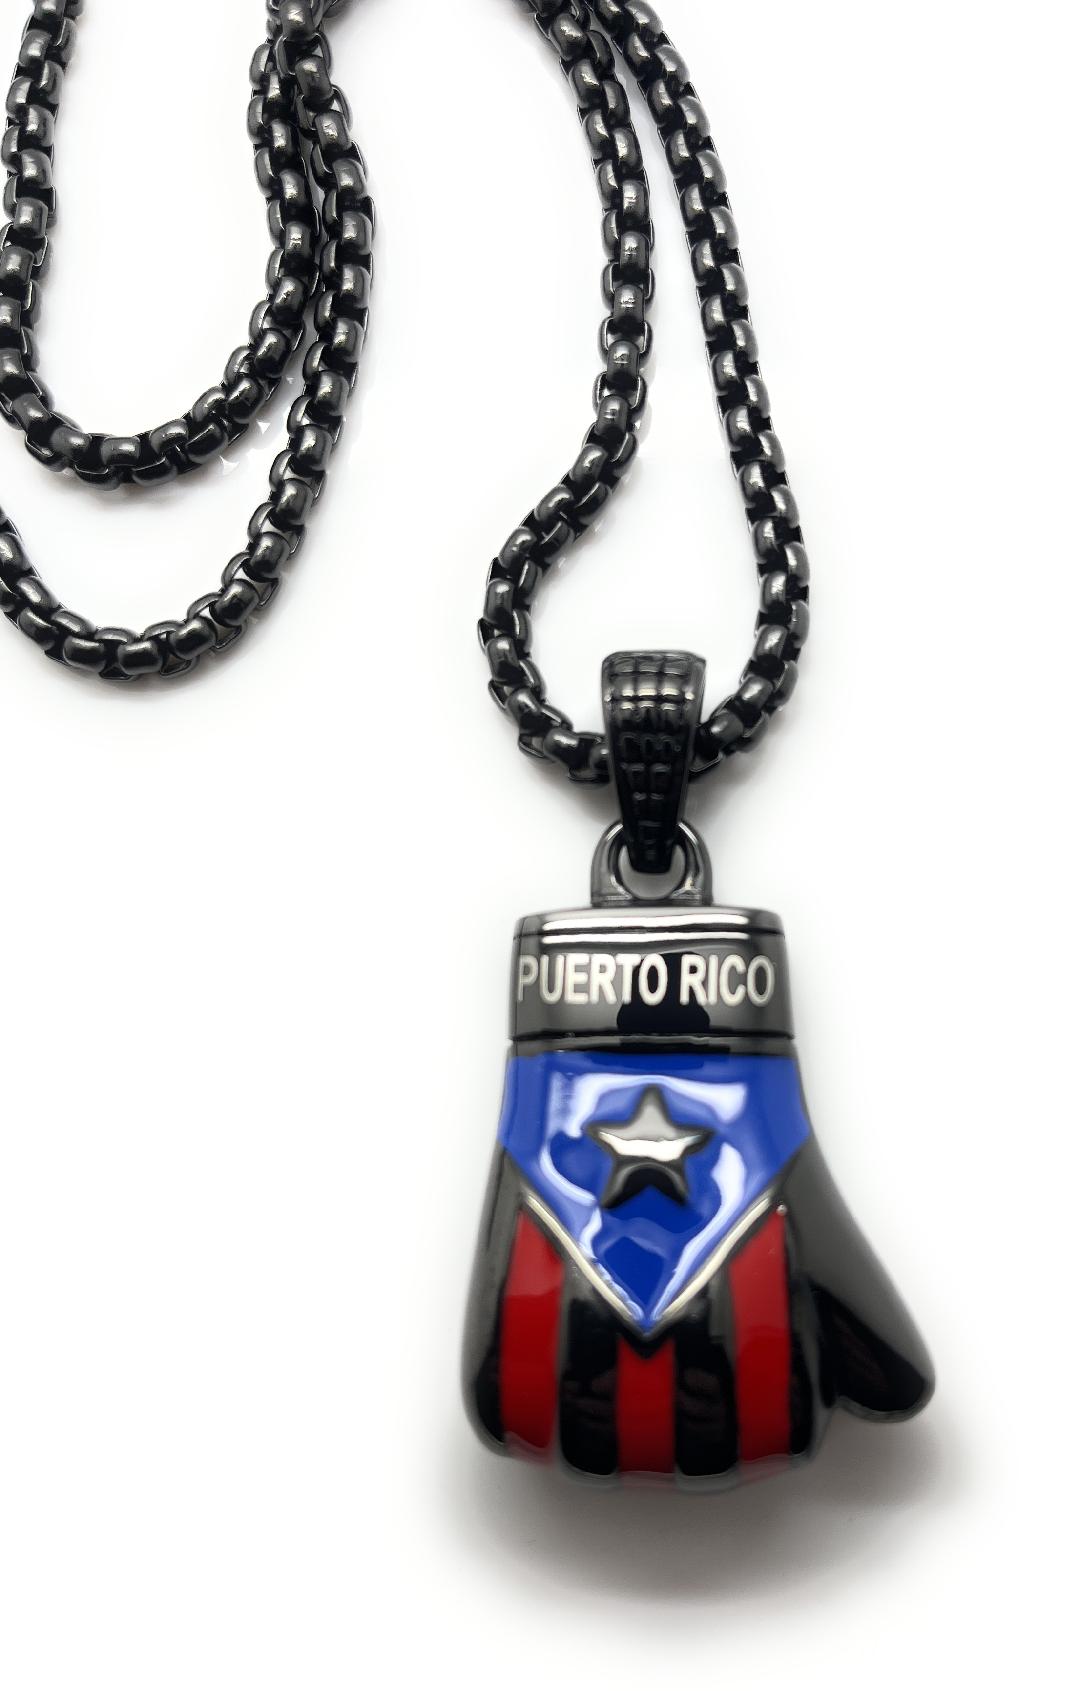 Buy Puerto Rico Map Flag Pendant Necklaces Women/Men Gold Pr Puerto Ricans  Necklace Jewelry Gifts at Amazon.in